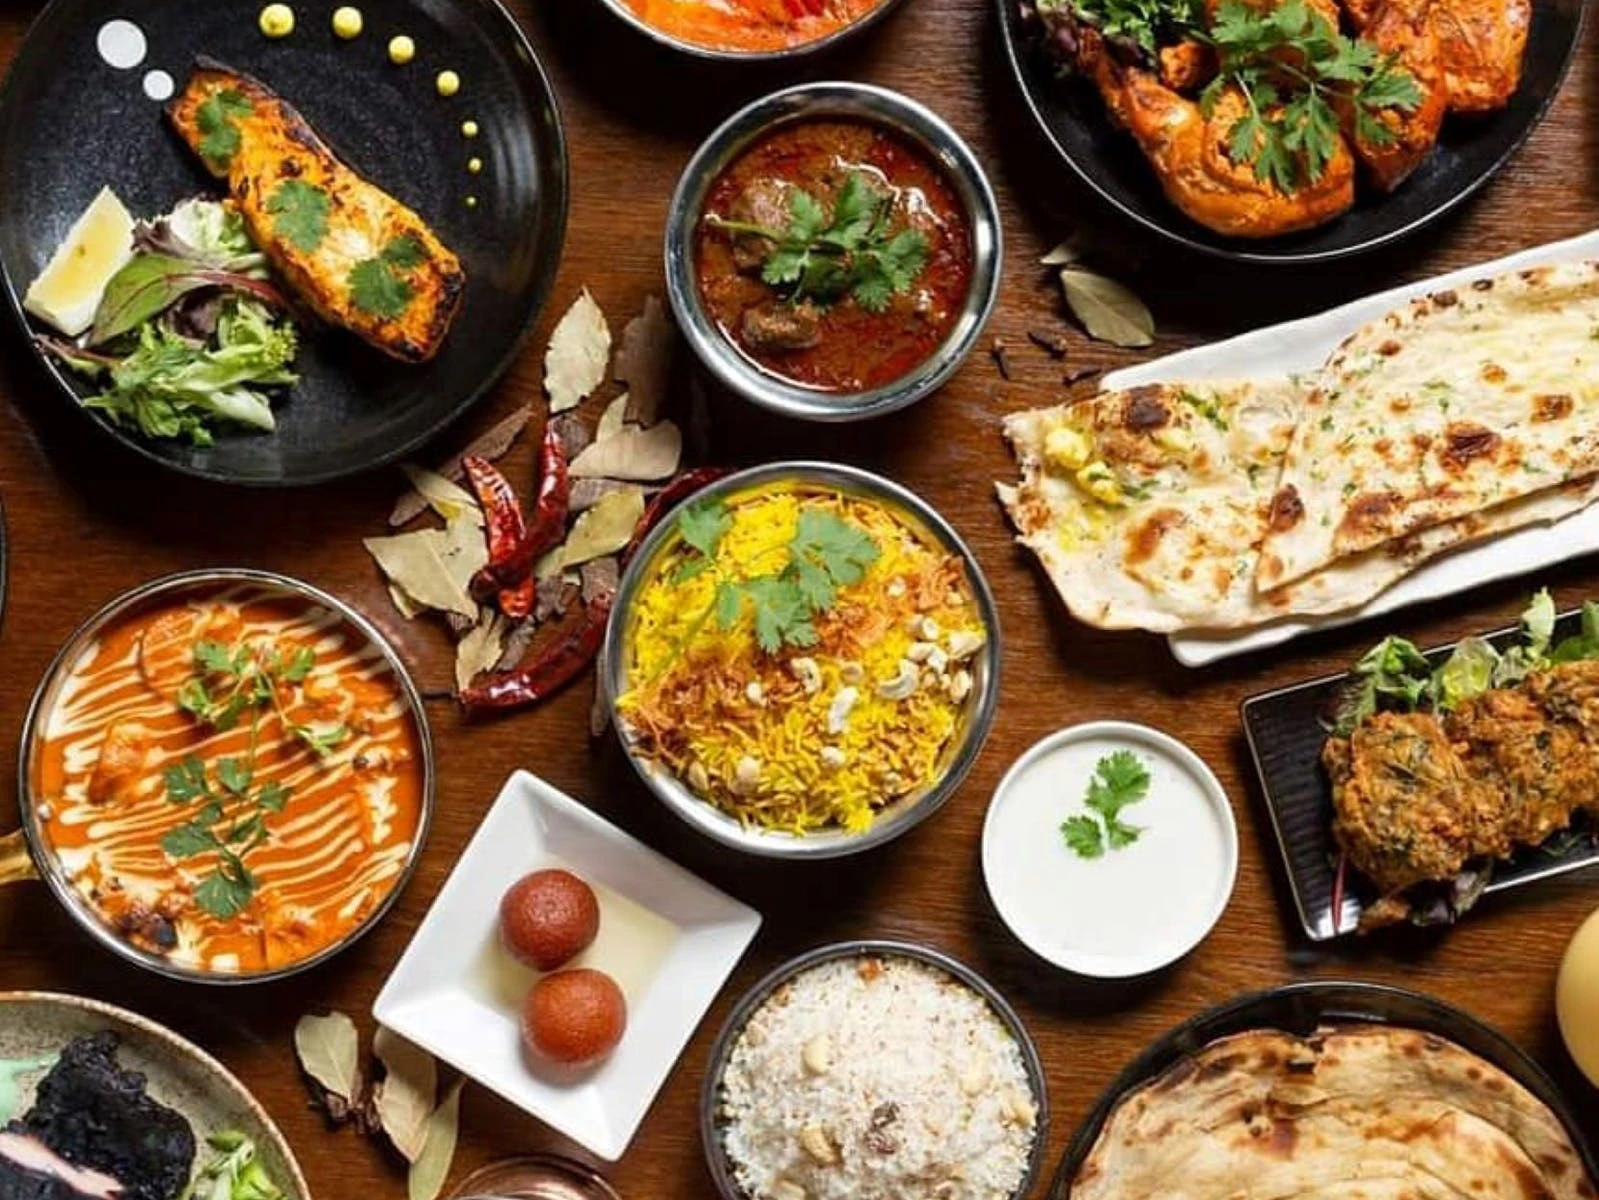 Top 5 Must-Try Dishes at Indian Restaurant in Wyndham Vale